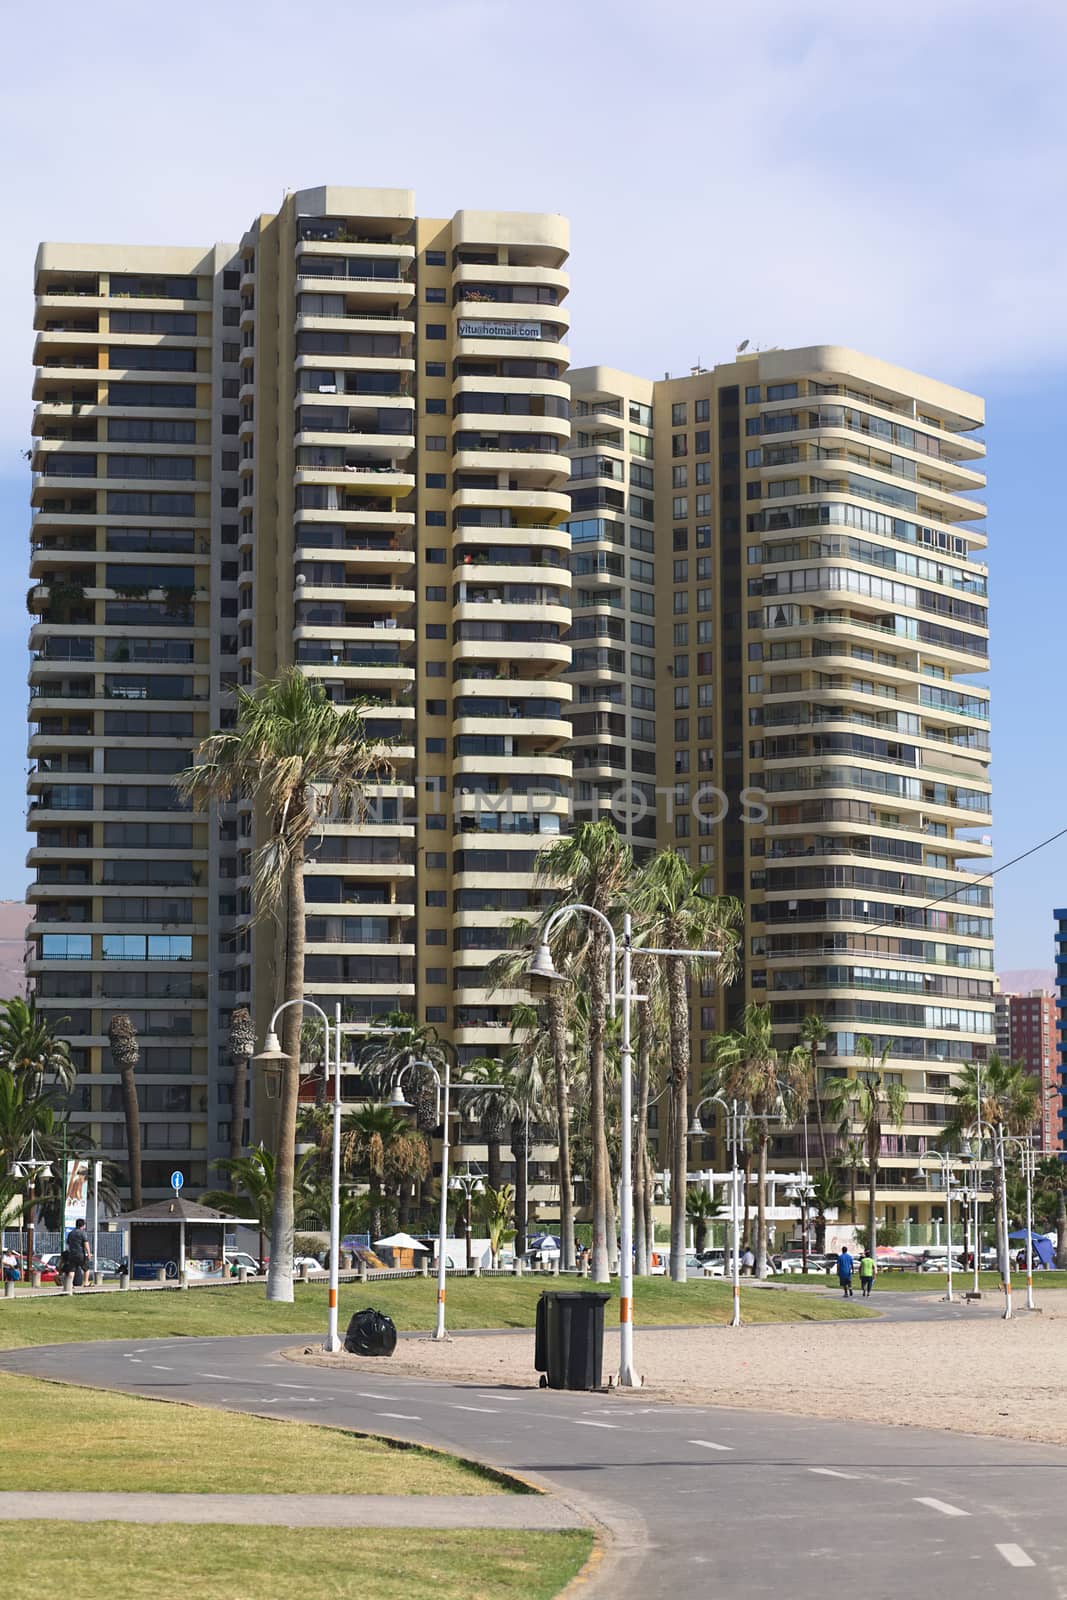 IQUIQUE, CHILE - JANUARY 23, 2015: Bike path leading between Cavancha beach and Arturo Prat Chacon avenue with a modern tall residential building along the road on January 23, 2015 in Iquique, Chile. Iquique is a popular beach town and free port city in Northern Chile. 